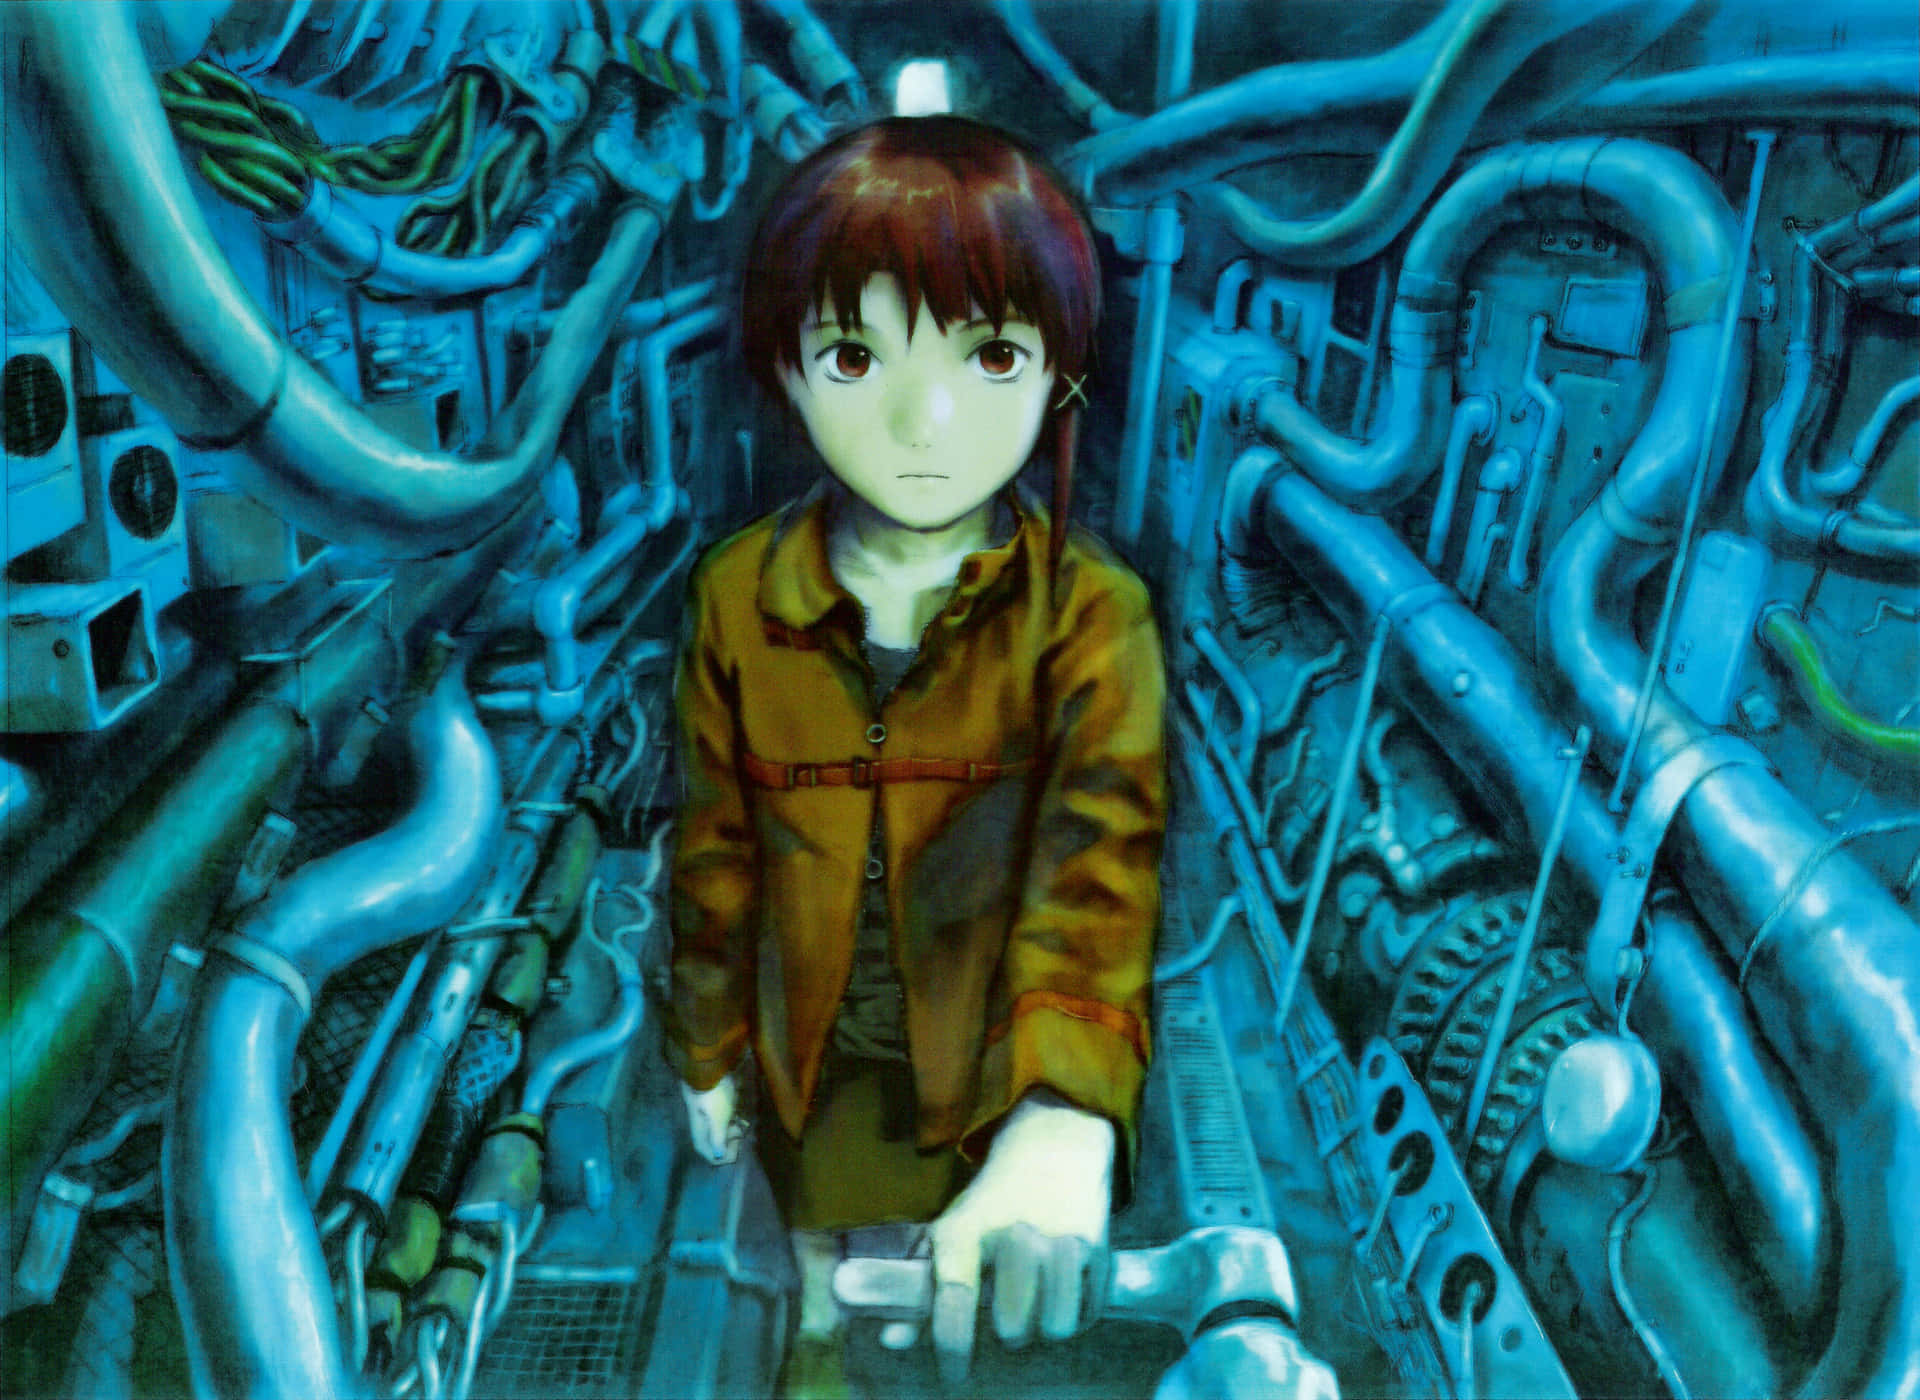 Meaning of the anime Serial Experiments Lain and ending explained  Lot  of Sense